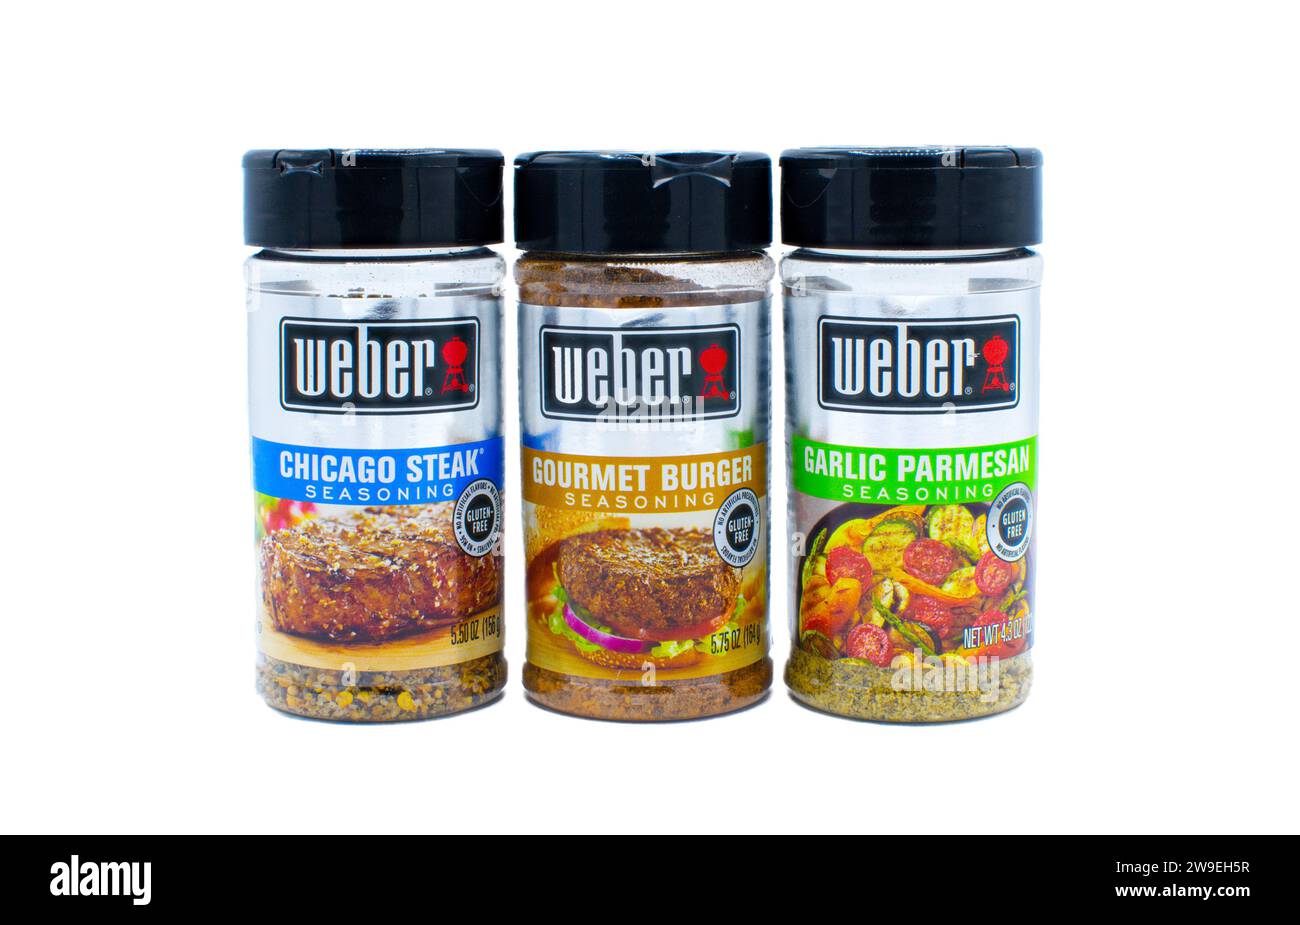 Weber brand seasoning rub for meat, beef, fish, pork and vegetable.  Three containers Chicago steak, gourmet burger, garlic Parmesan cheese.  Isolated Stock Photo